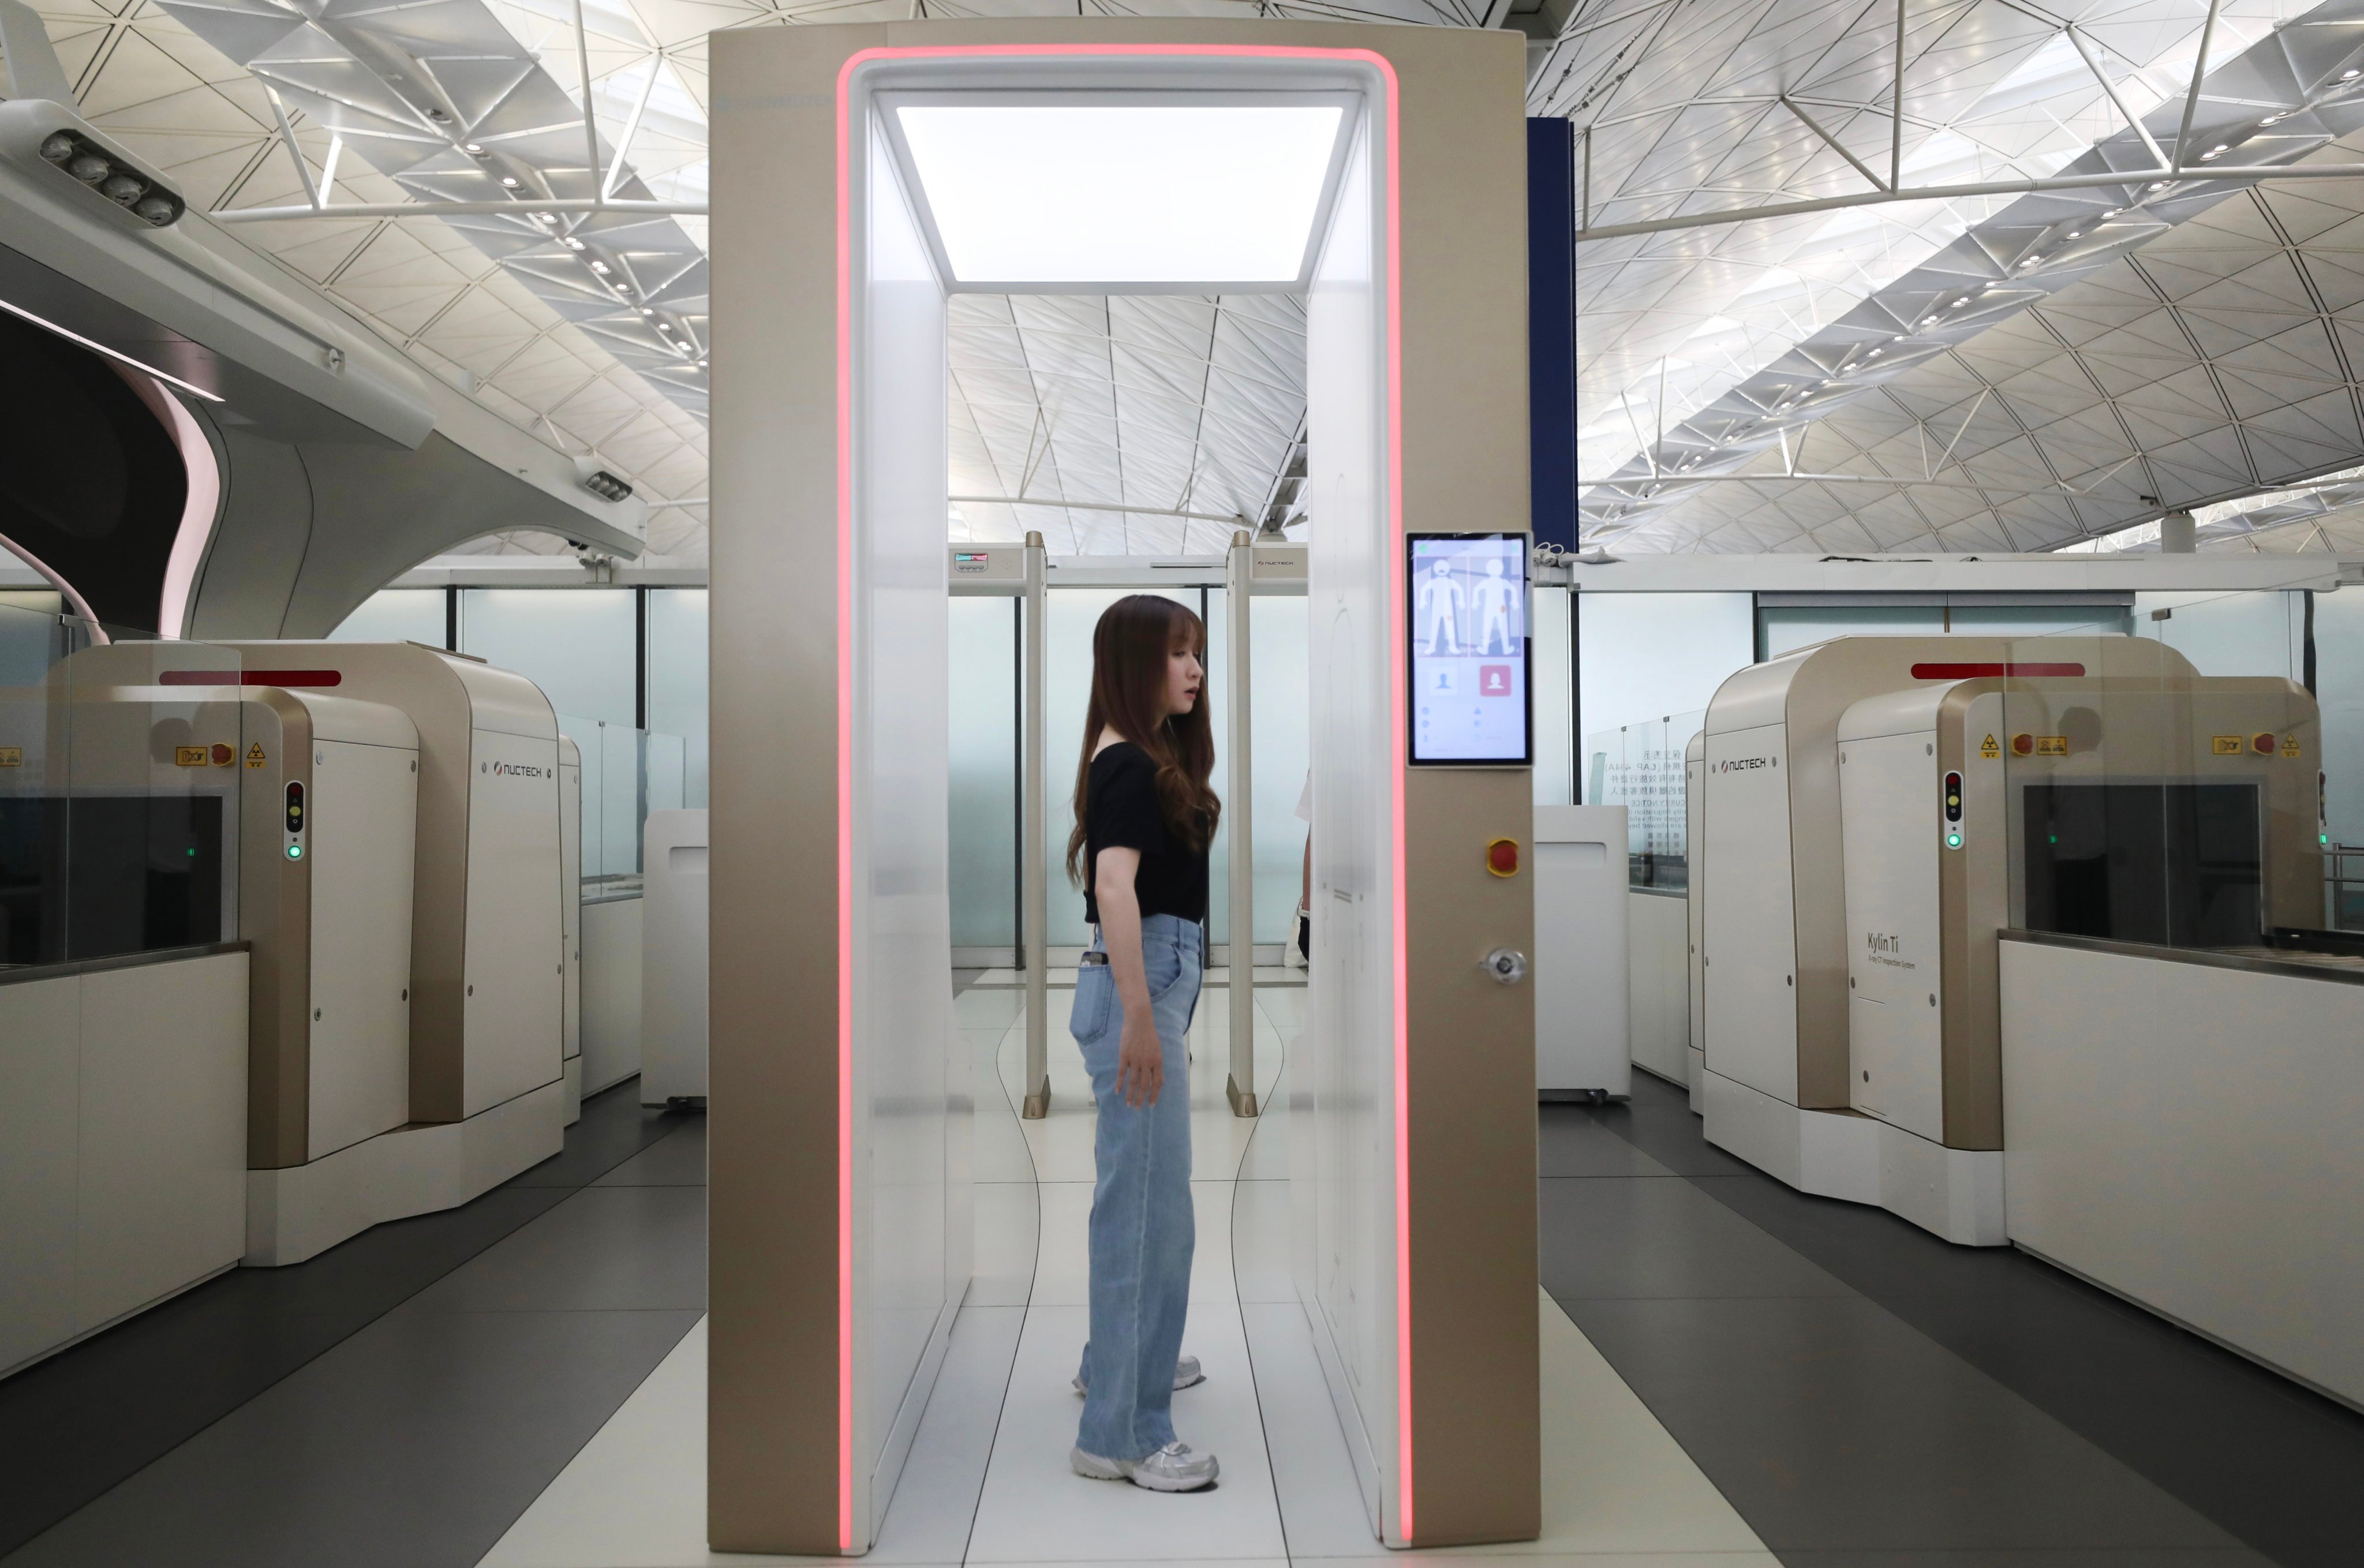 A full body scanner, part of a smart security screening channel that will begin operations on July 2. Photo: Xiaomei Chen